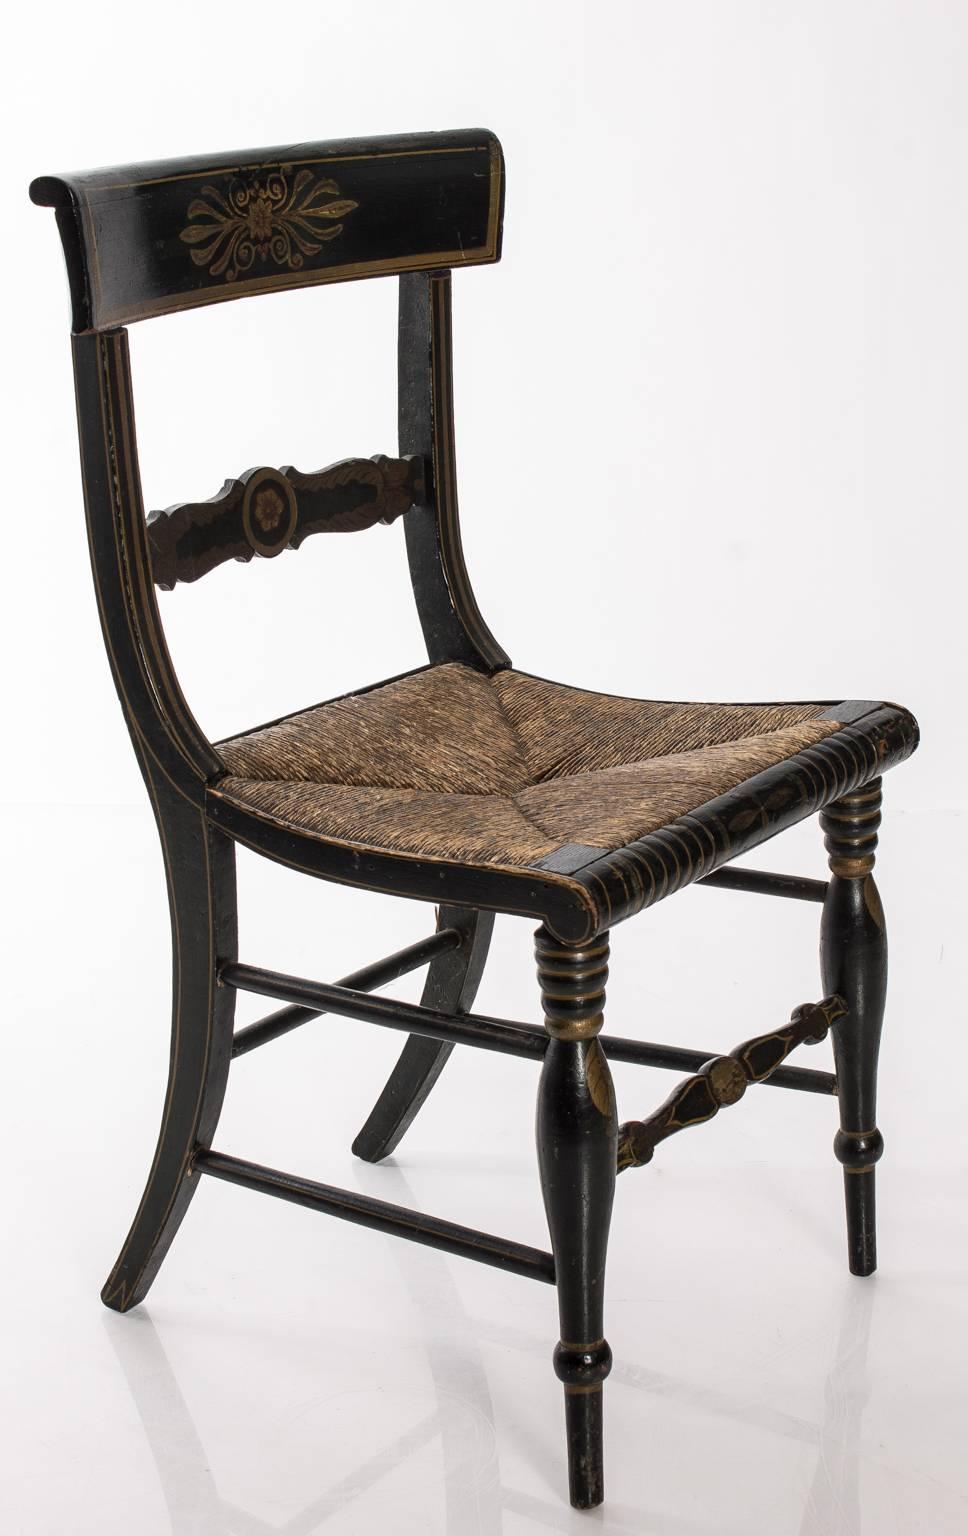 Painted Regency style side chair with original rush seat.